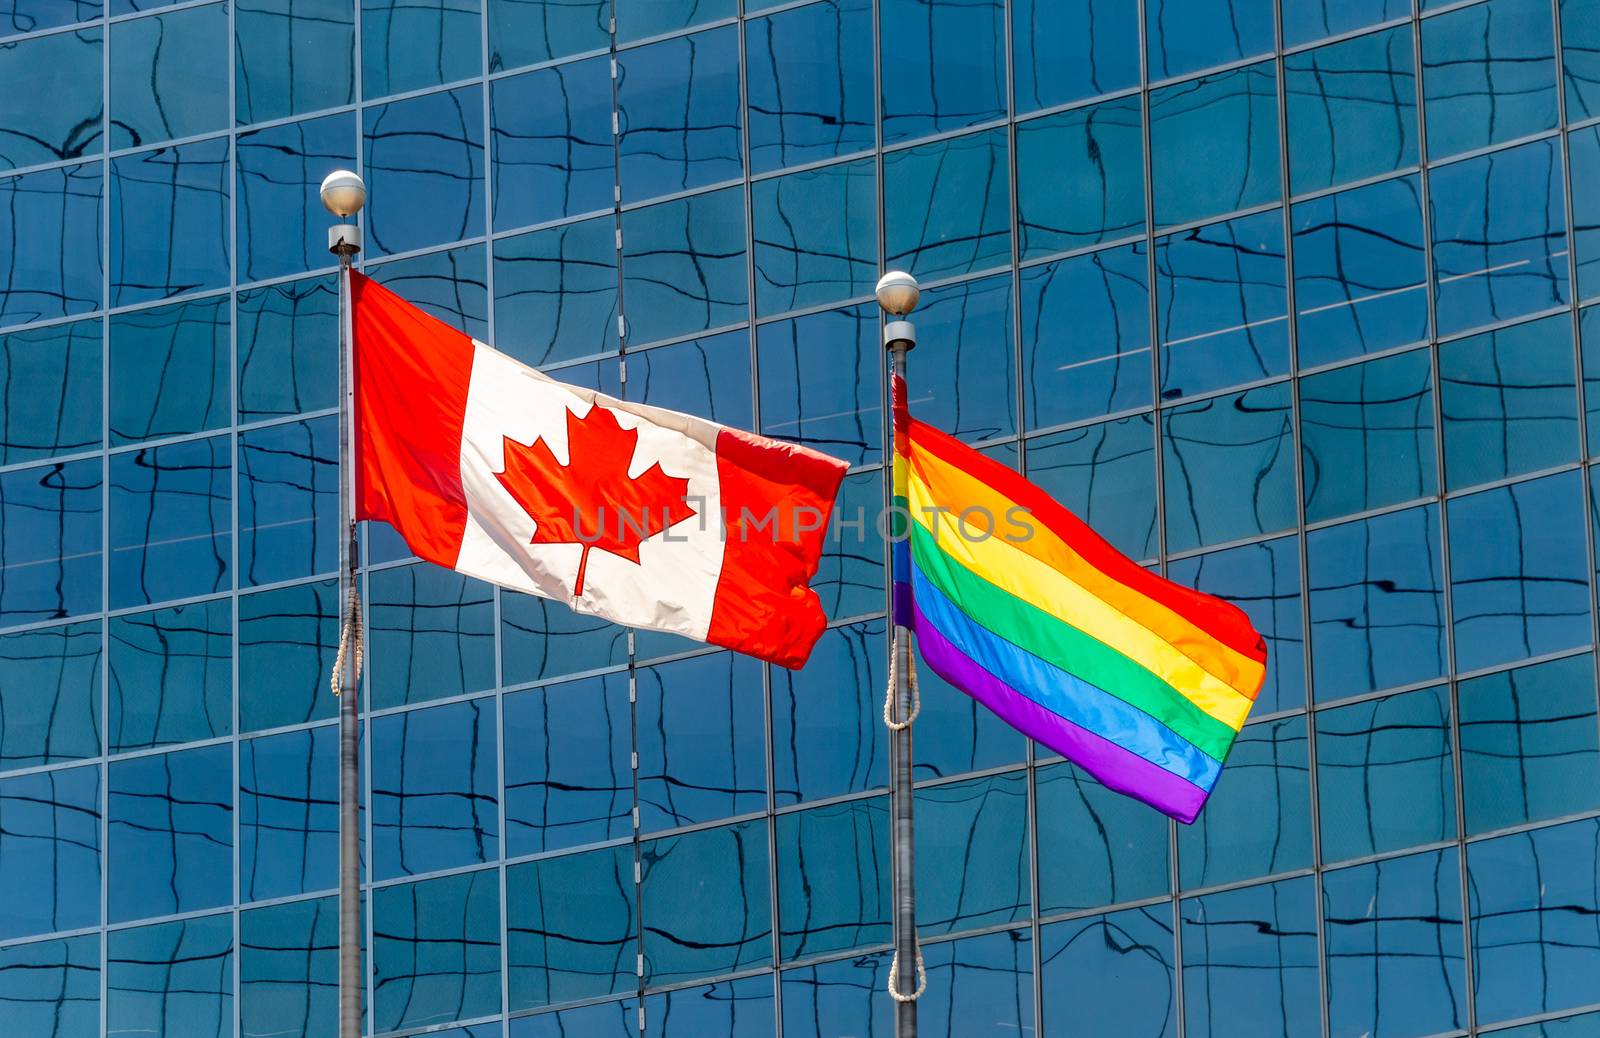 Canadian flag next to rainbow flag in Toronto, Canada by mbruxelle